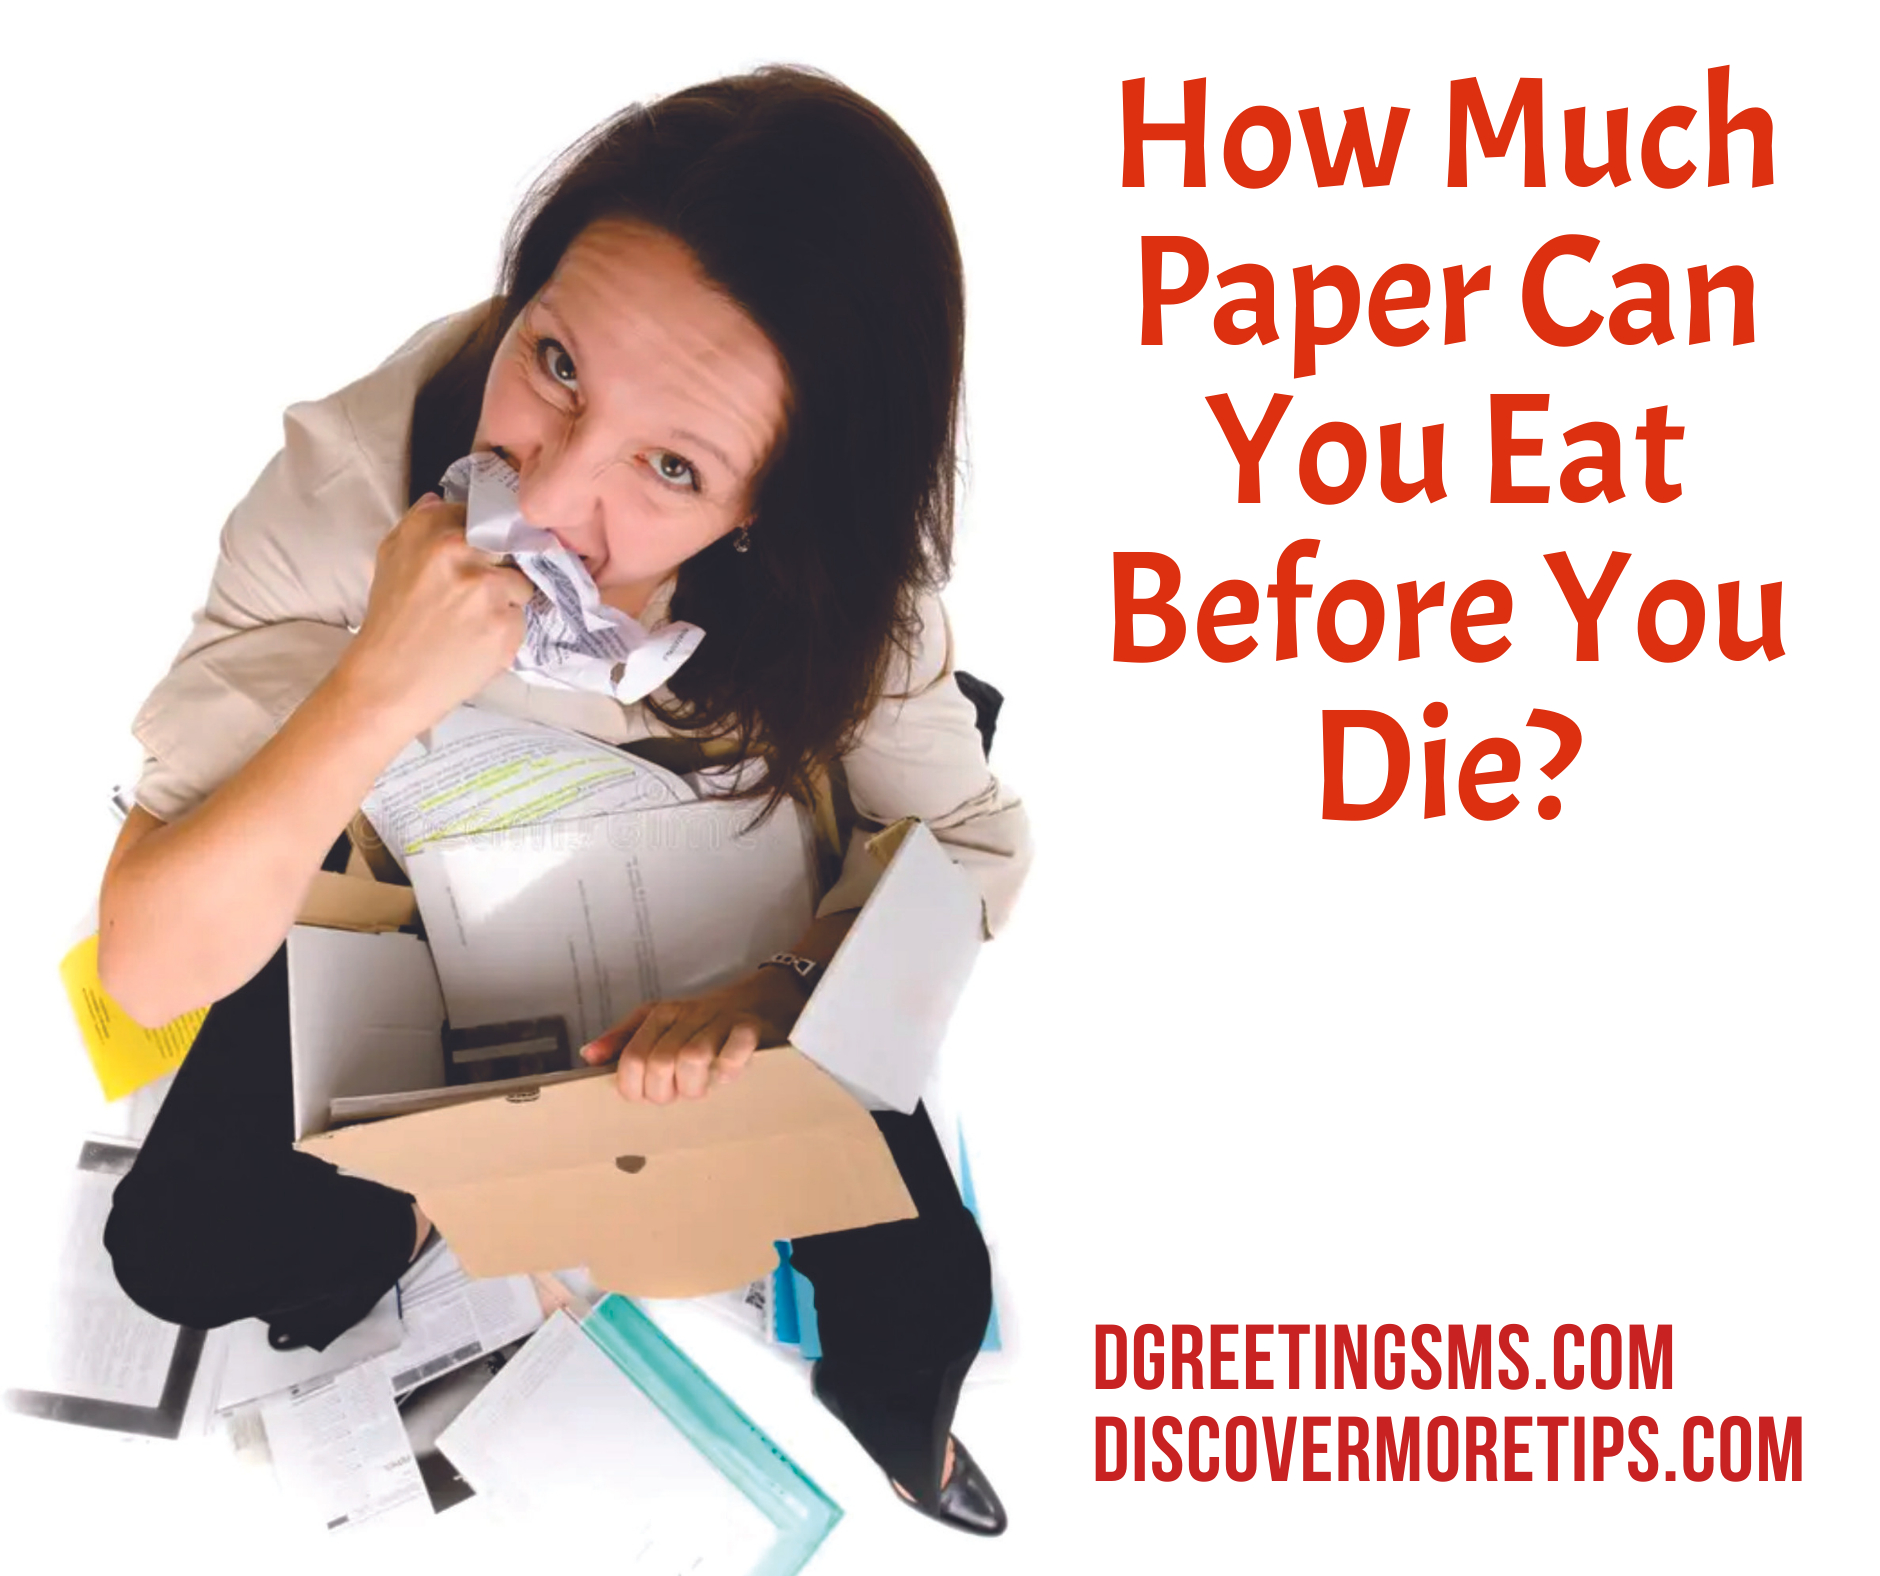 How Much Paper Can You Eat Before You Die?